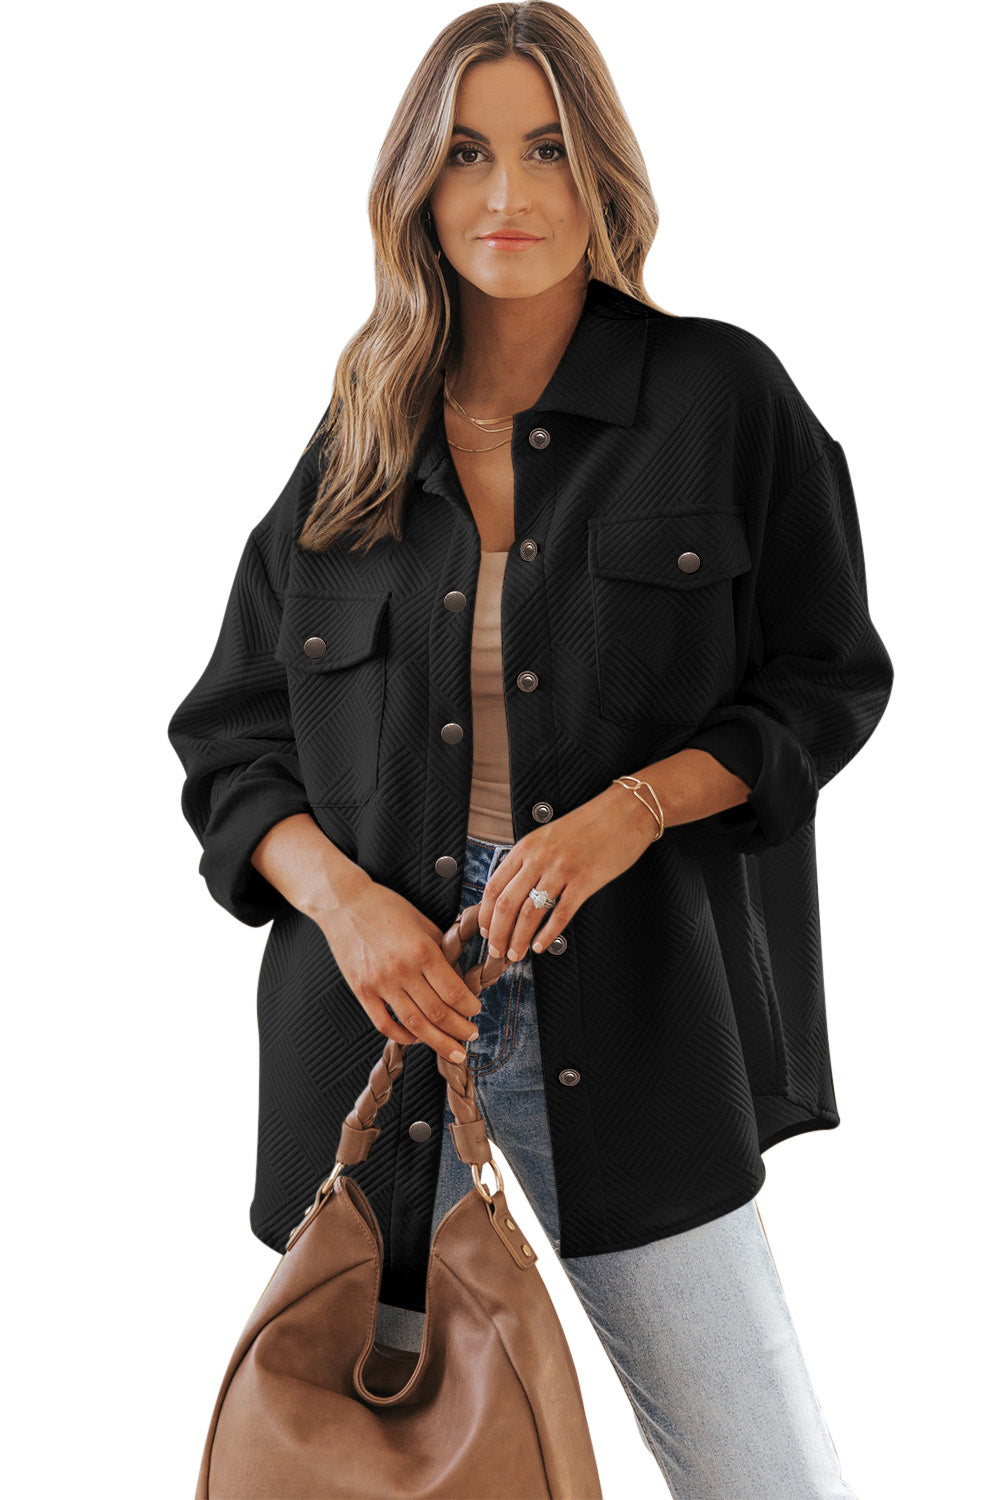 Cali Chic Black Solid Textured Flap Pocket Buttoned Shacket